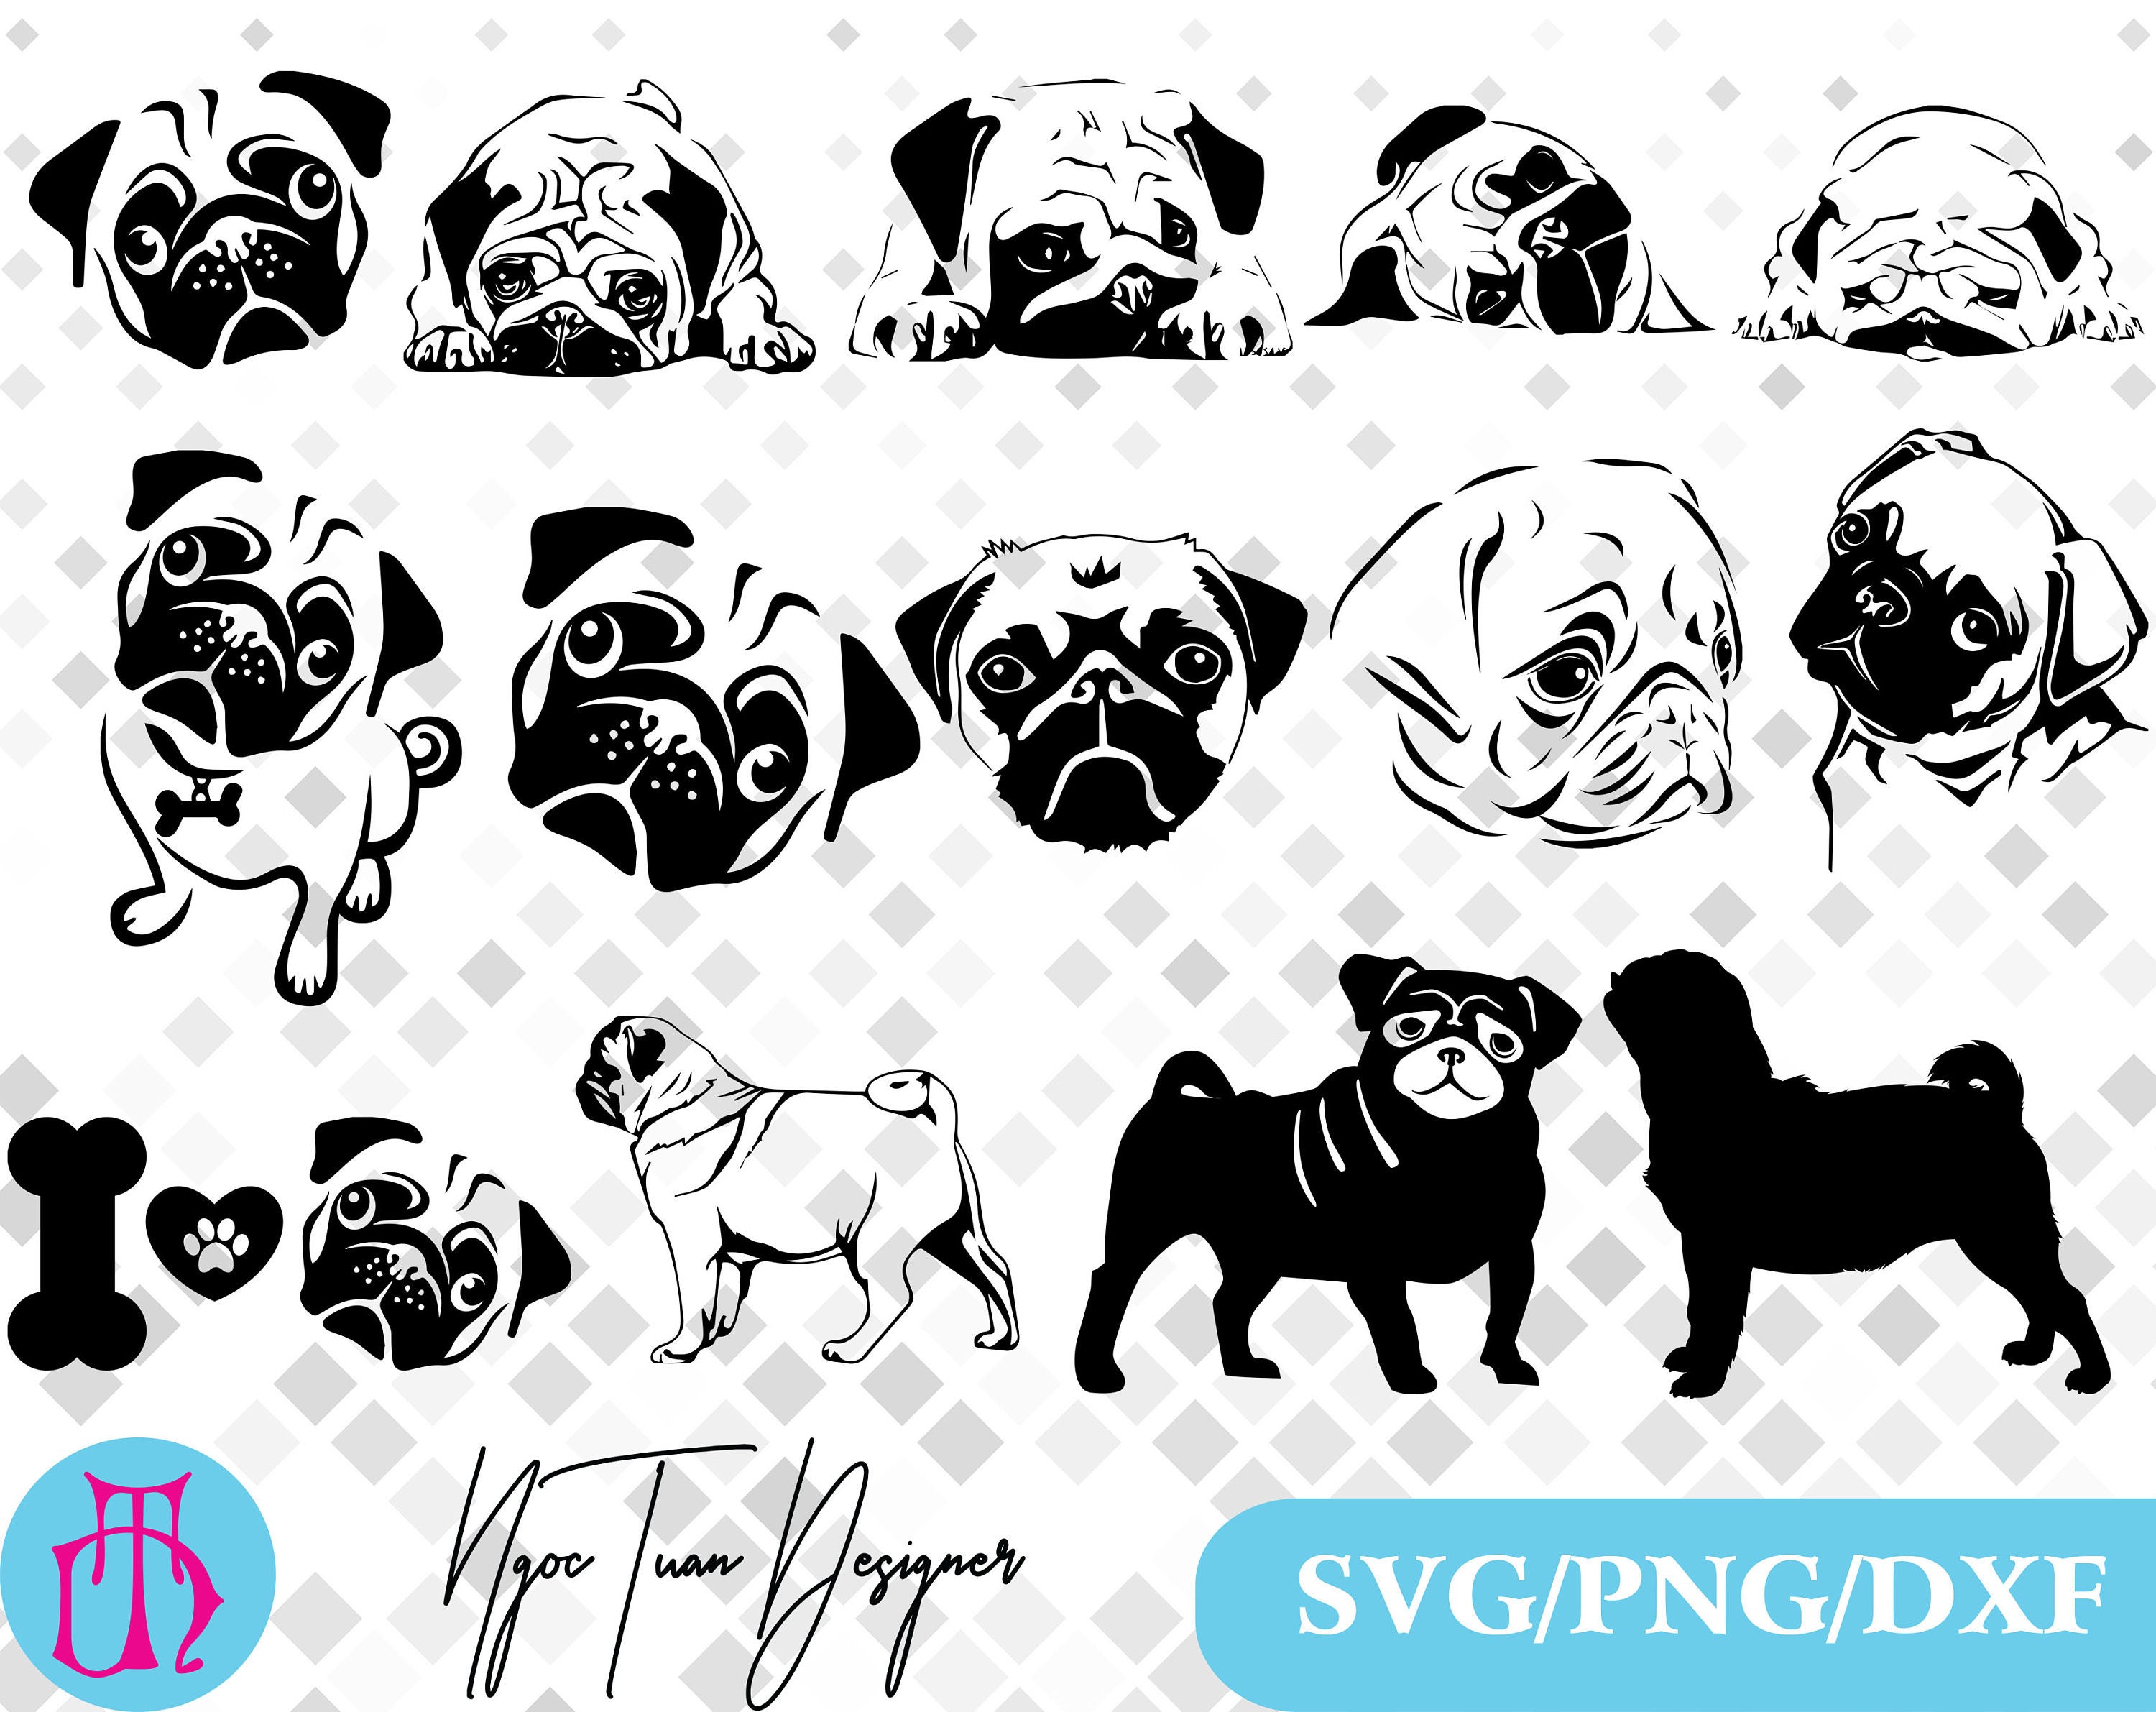 Download Pug svg,png,dxf/Pug clipart for Print,Design,Silhouette ...